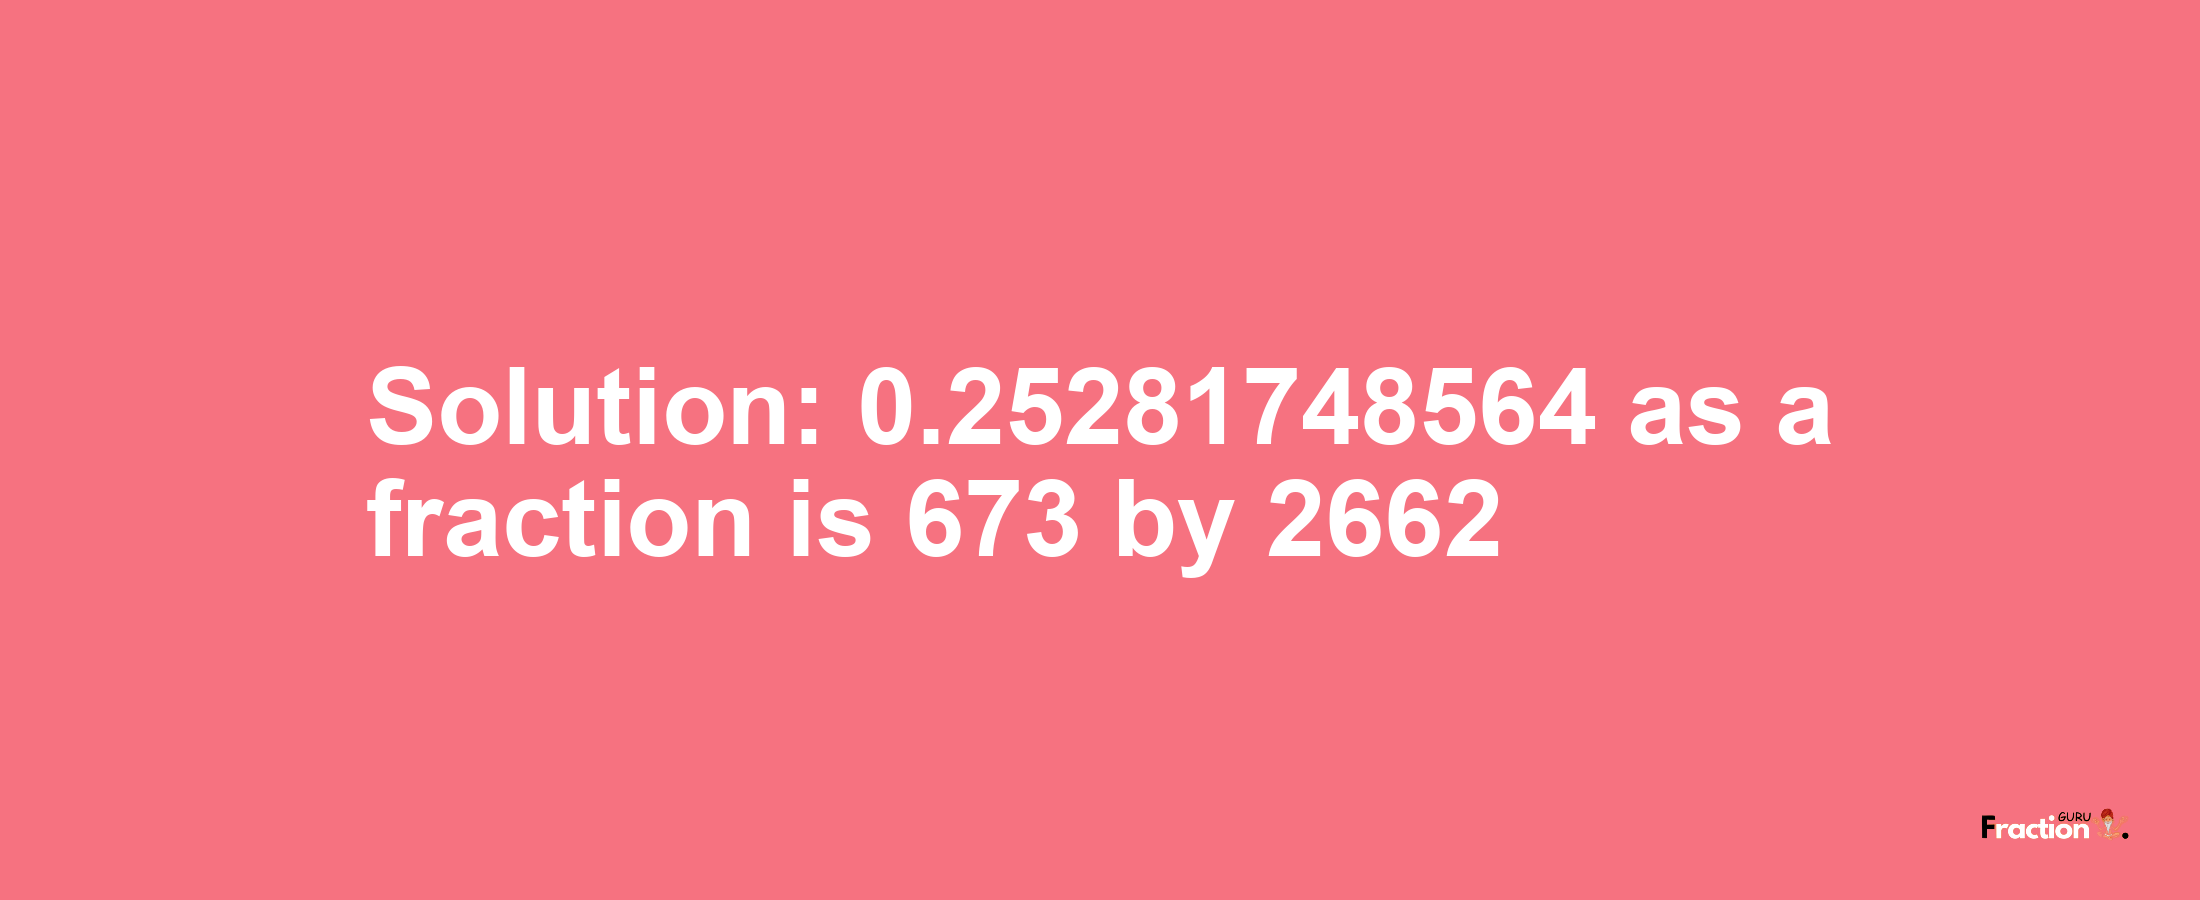 Solution:0.25281748564 as a fraction is 673/2662